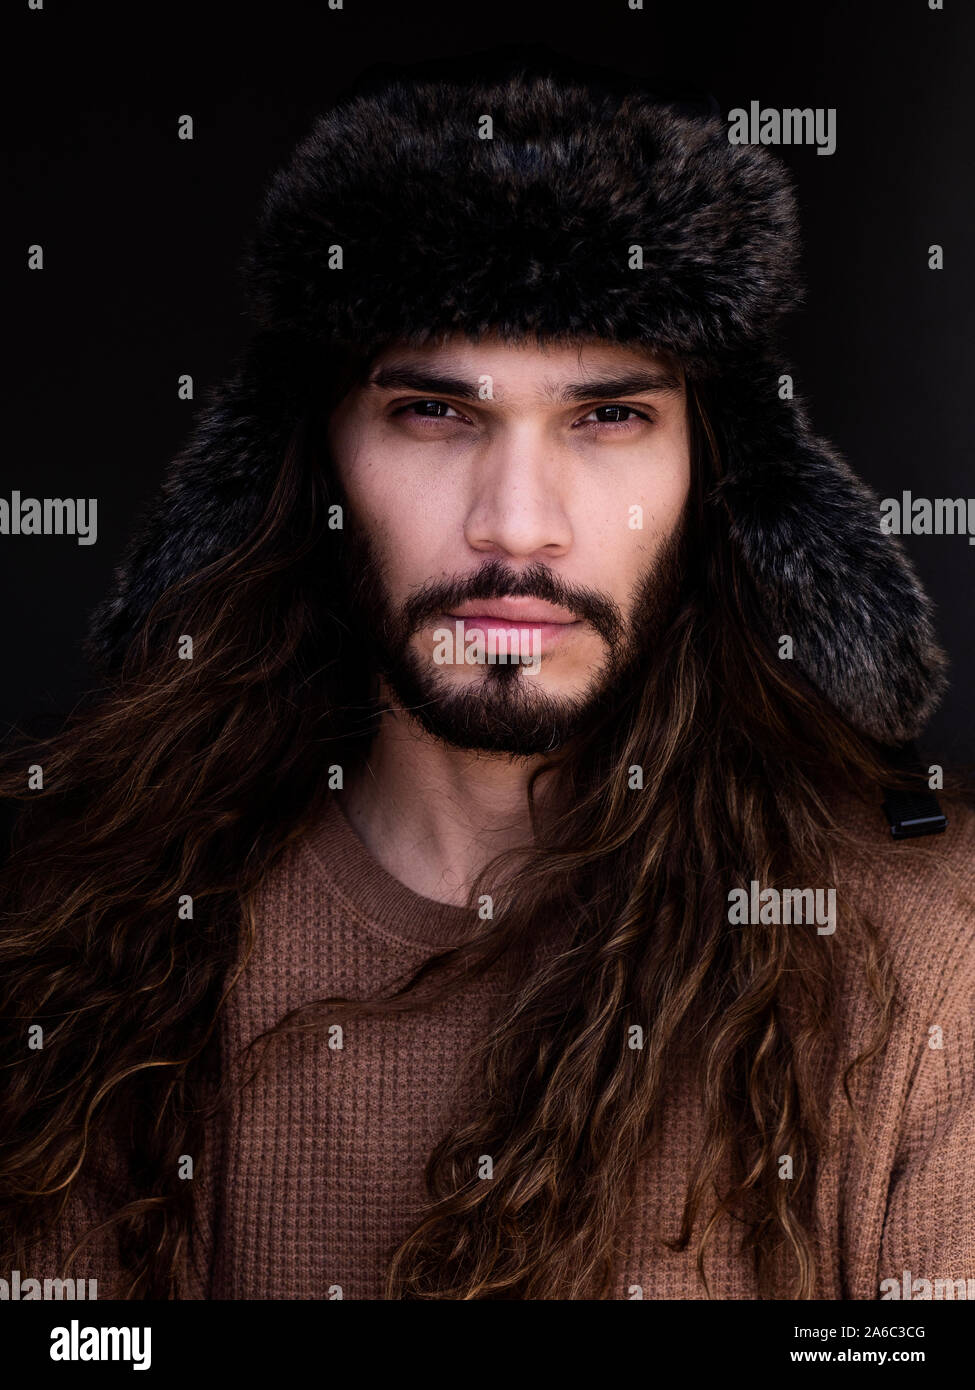 Handsome young Colombian man wearing fur hat Stock Photo